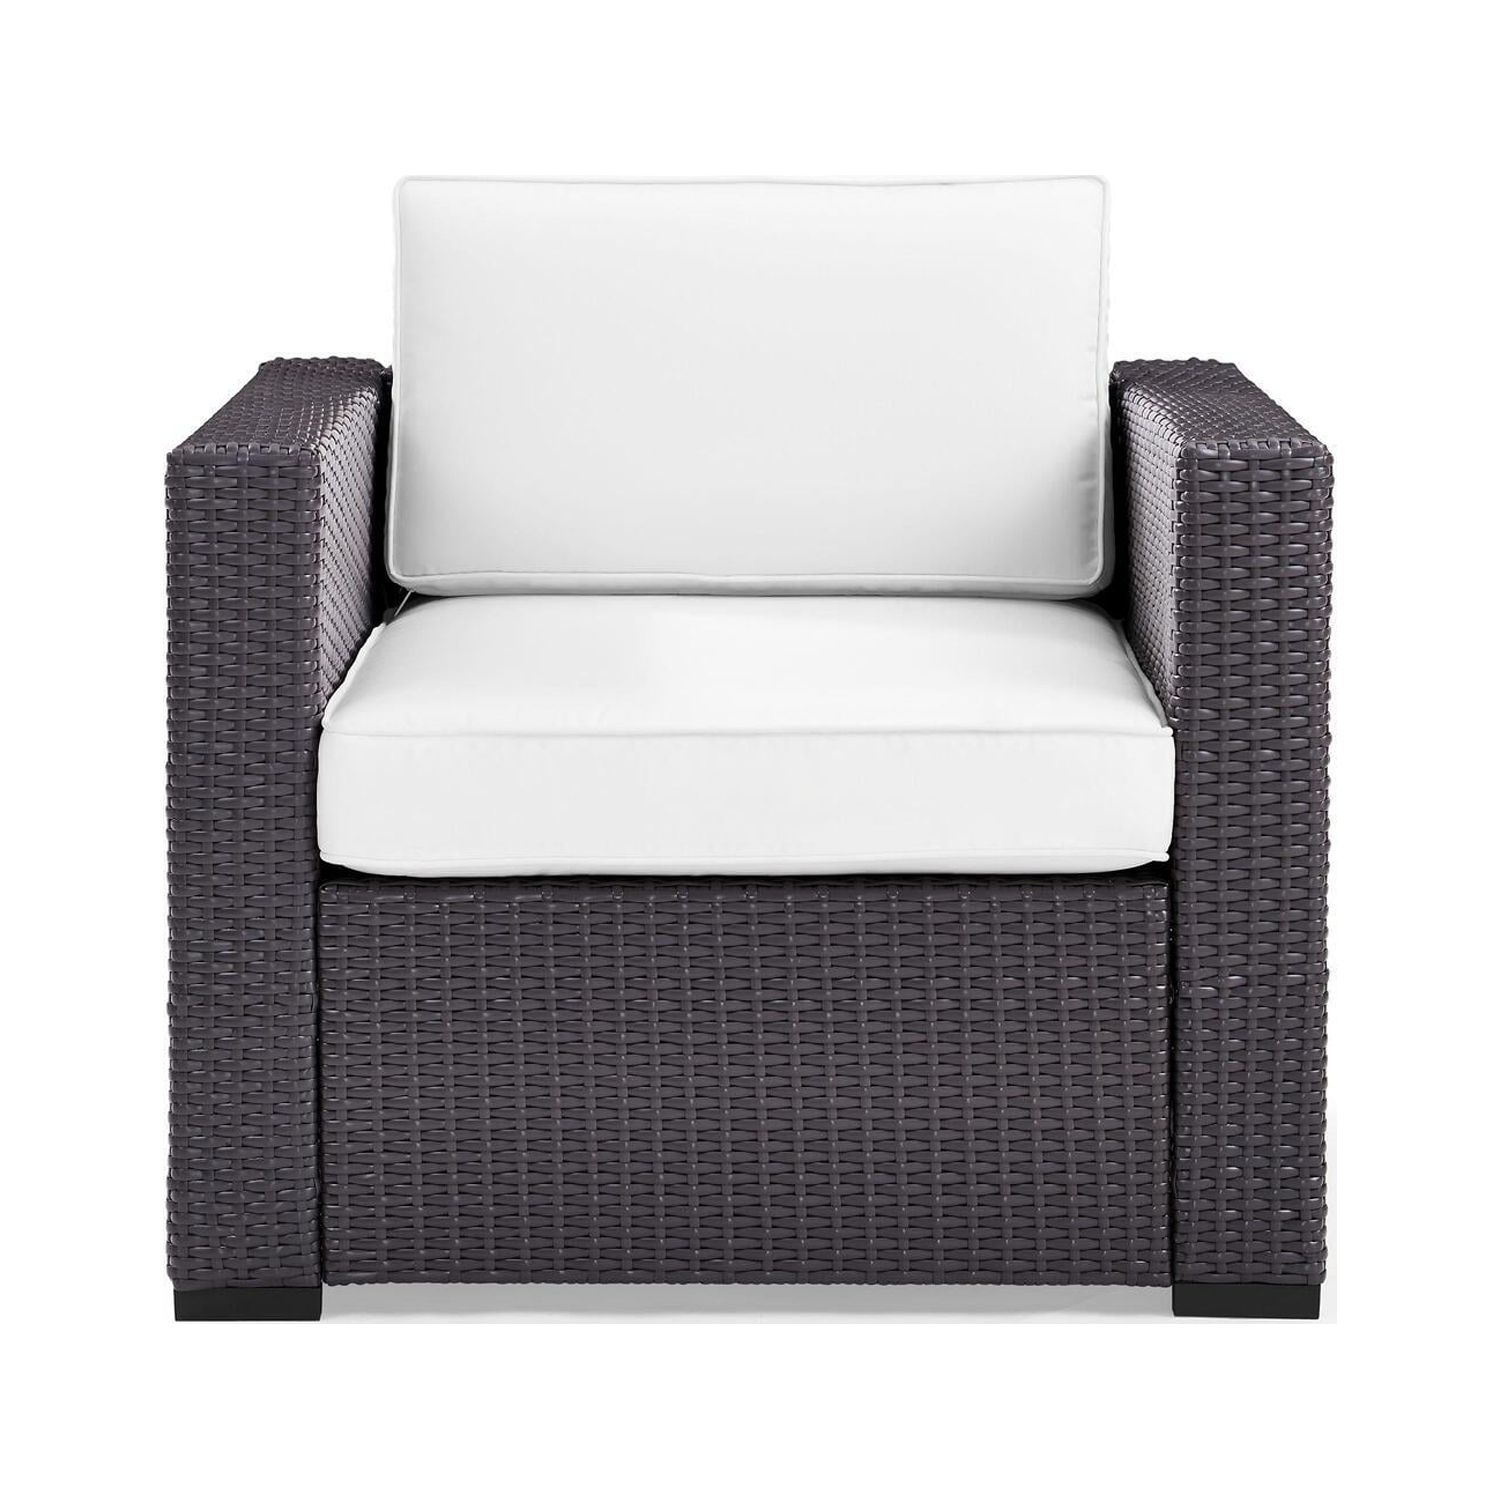 Biscayne Armchair With White Cushions - image 1 of 6